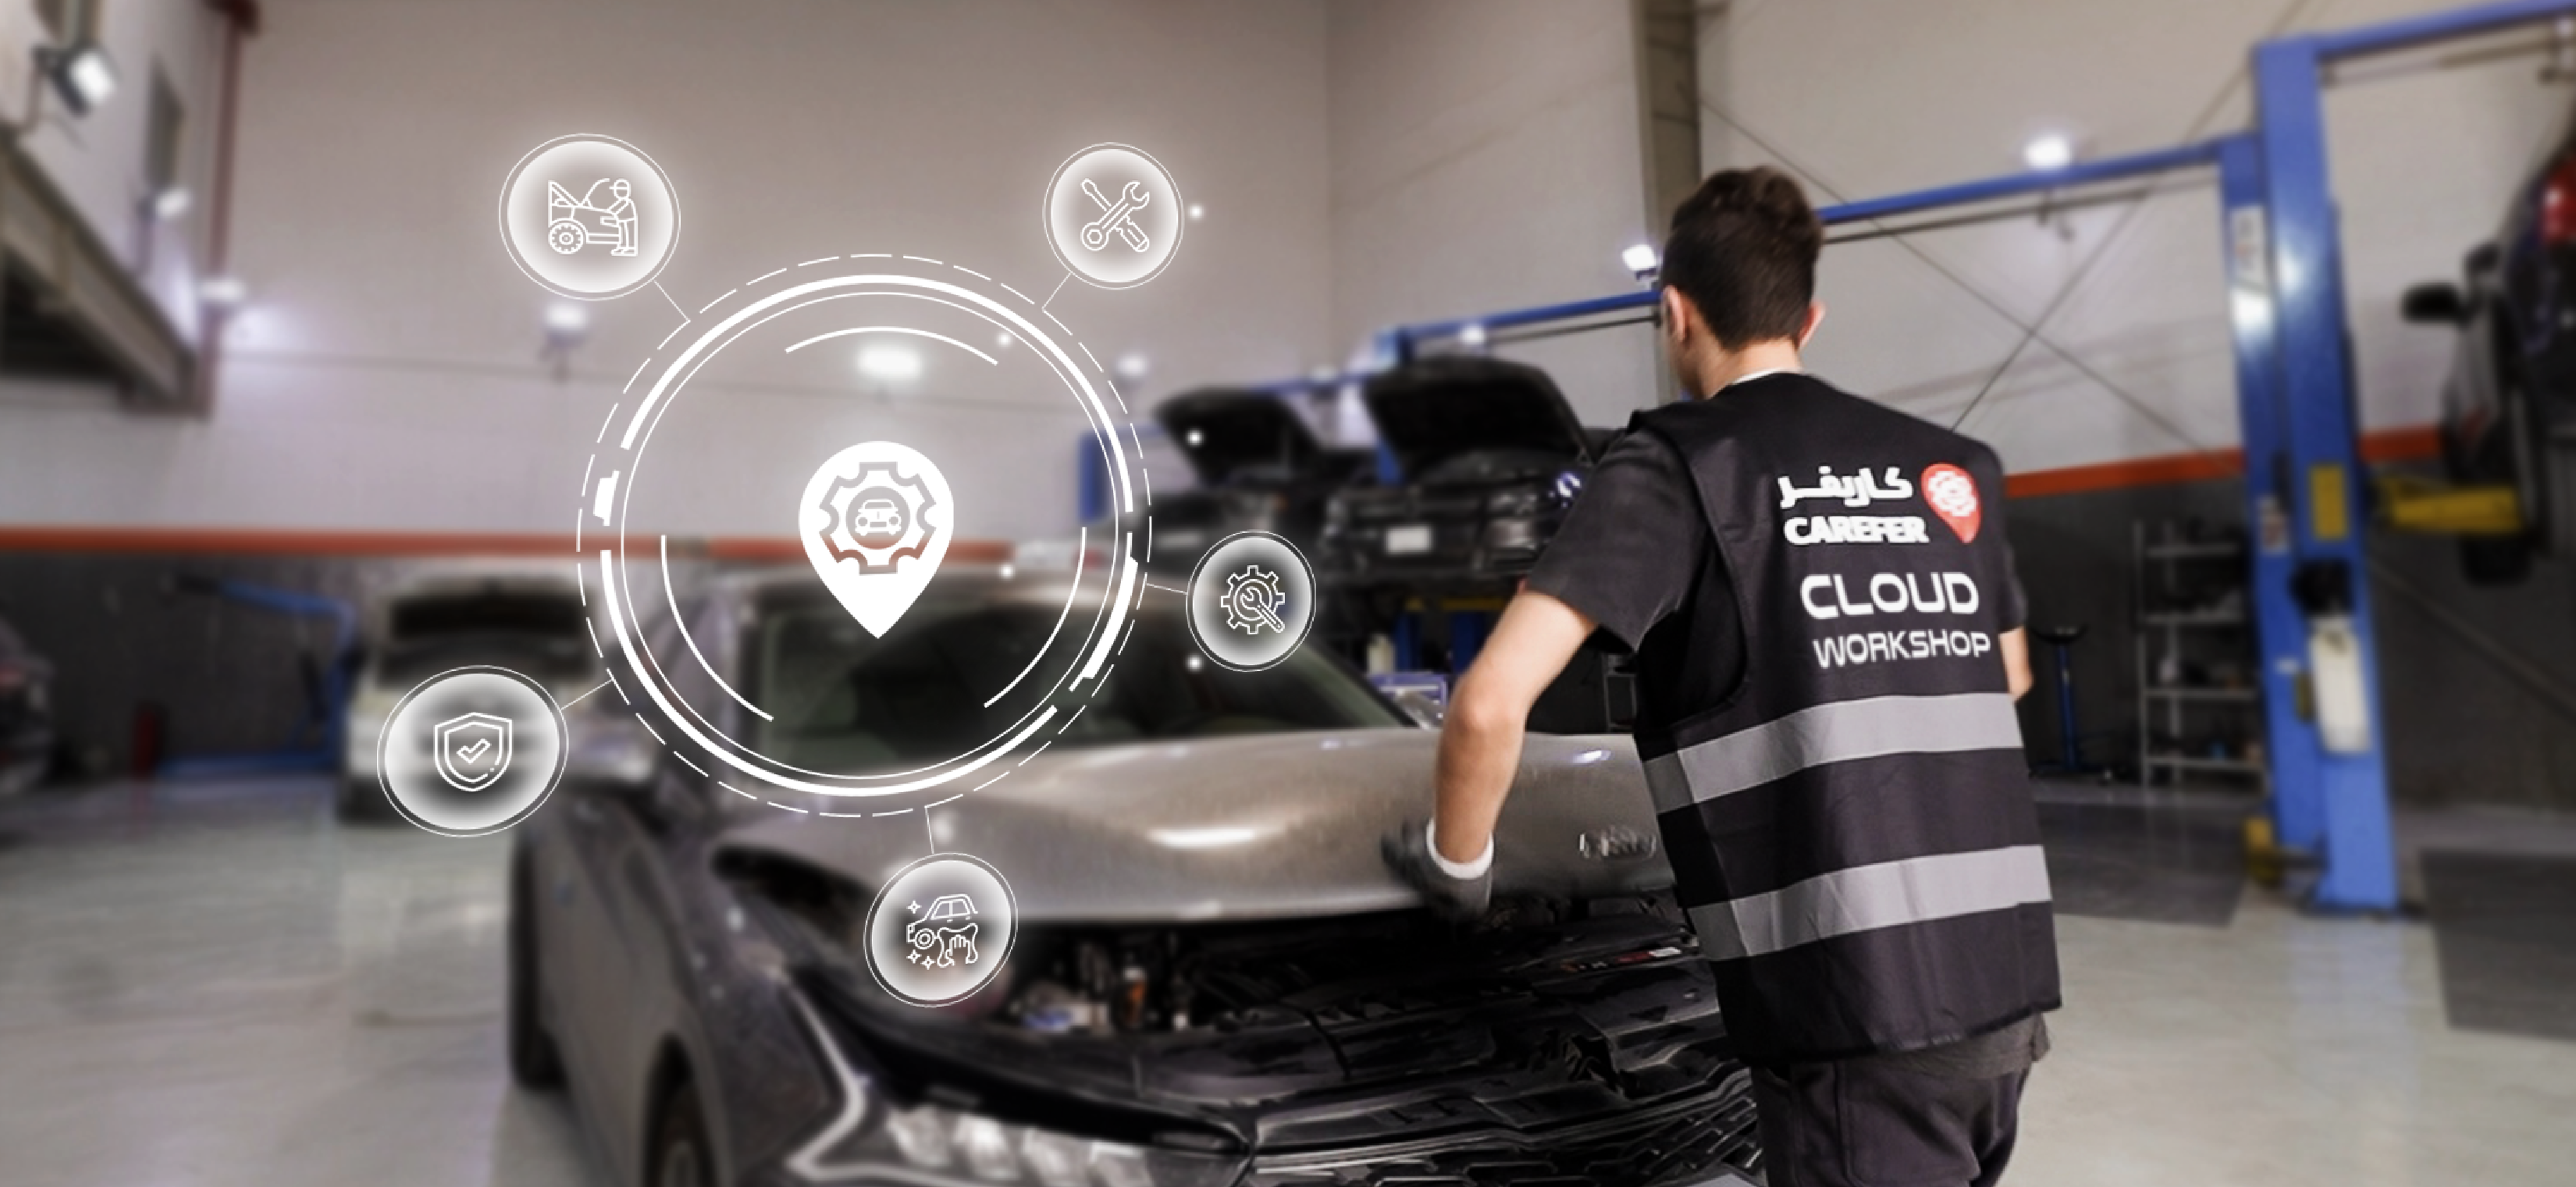 Carefer launches the first cloud car maintenance workshop in Saudi Arabia